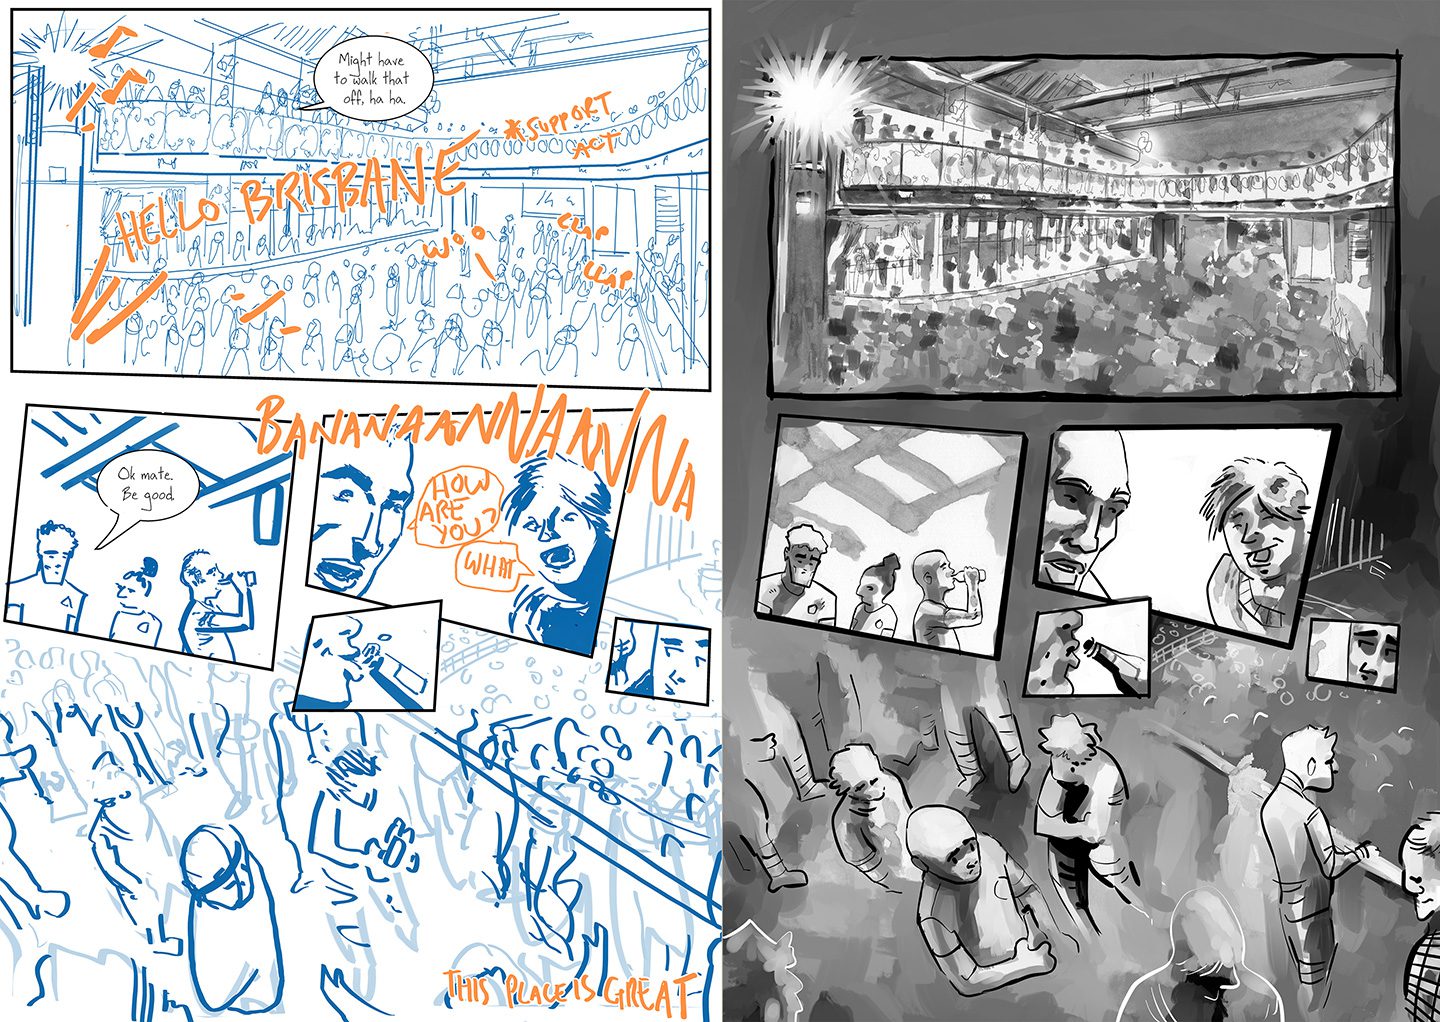 Comic page from life in the gutter- venue crowd scene